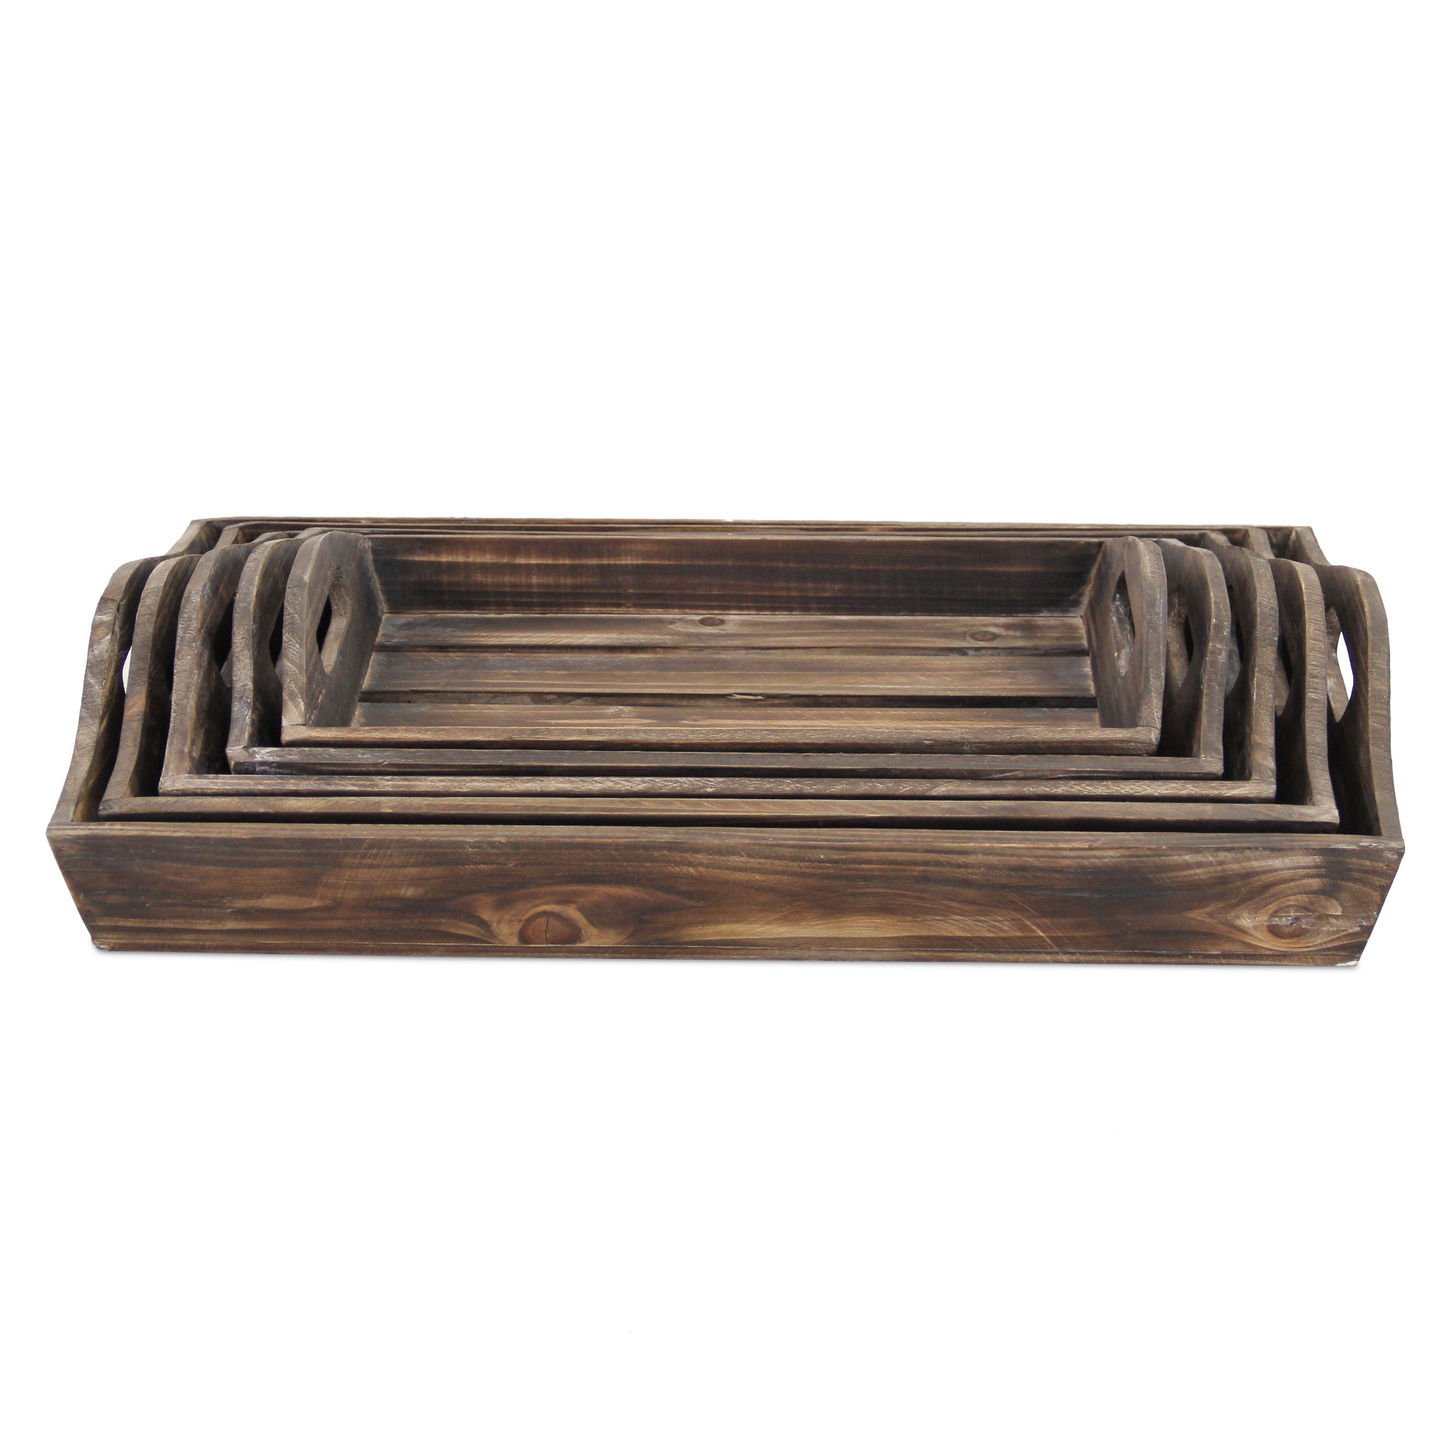 "Set Of 5 Rustic Natural Brown Wood Handmade Trays With Handles"